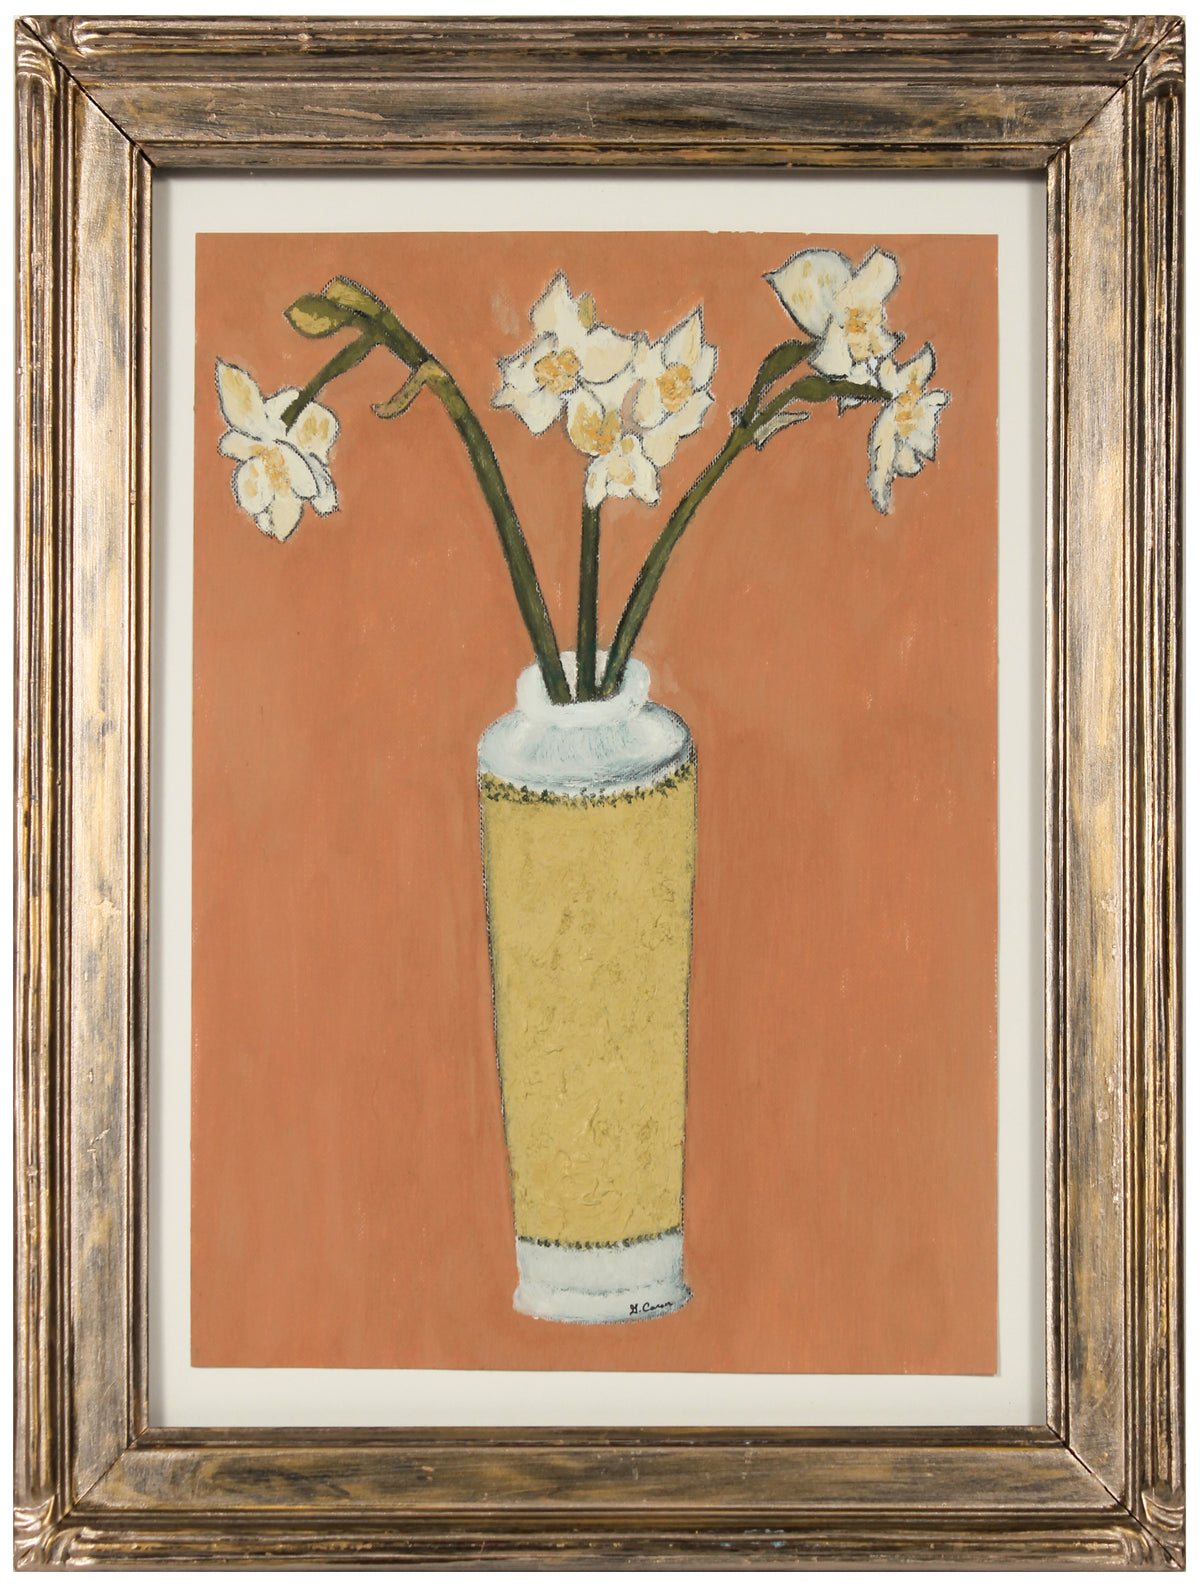 &lt;i&gt;Daffodils from the Land&lt;/i&gt; &lt;br&gt;2012 Oil and Graphite on Canvas Paper&lt;br&gt;&lt;br&gt;#B2145